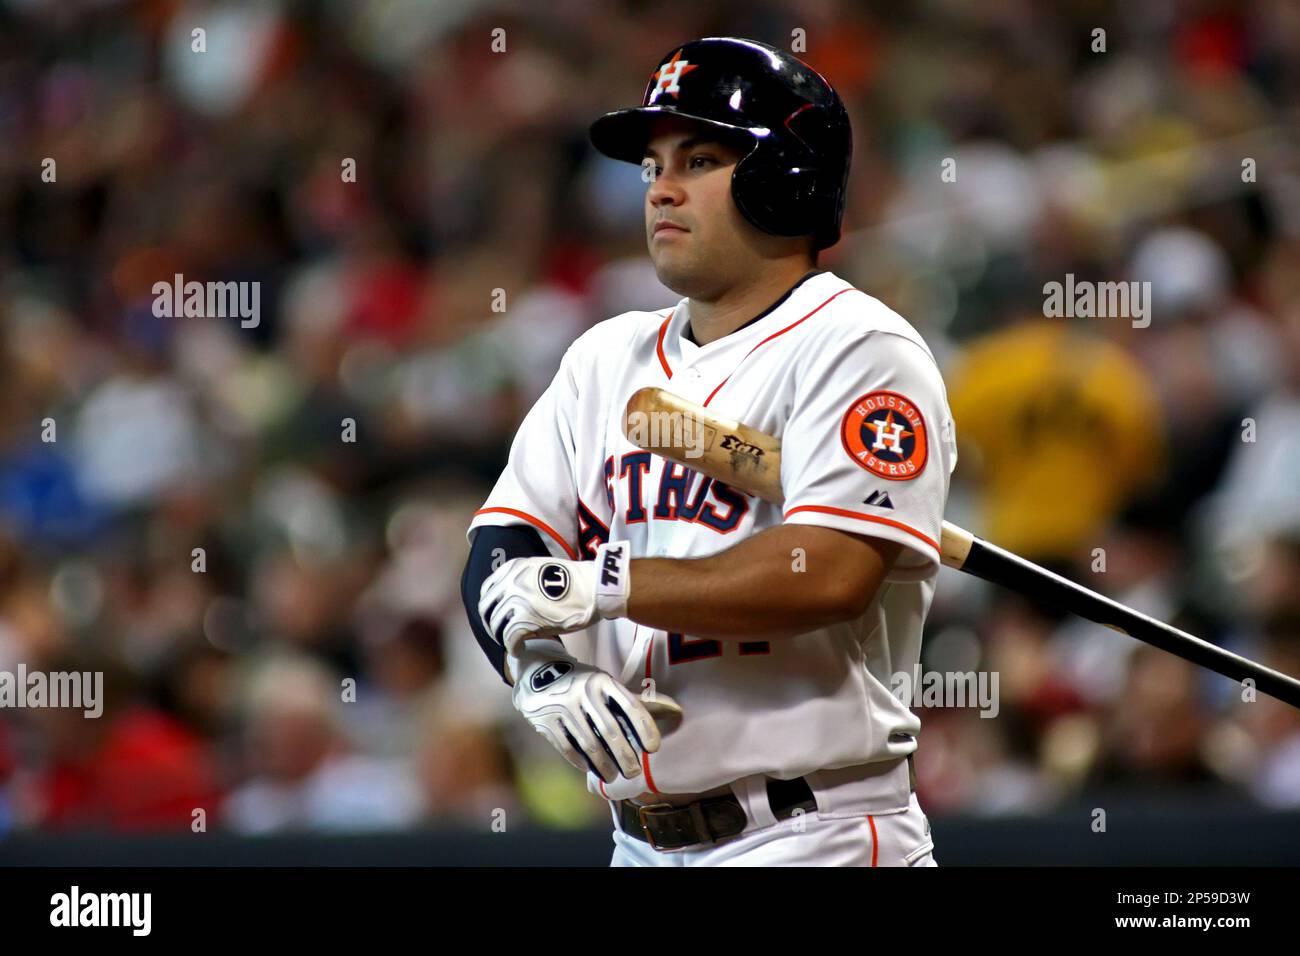 July 4, 2013 - Houston, Texas, United States of America - JUL 04 2013:  Houston Astros infielder Jose Altuve #27 walks to the batter's box during  the MLB baseball game between the